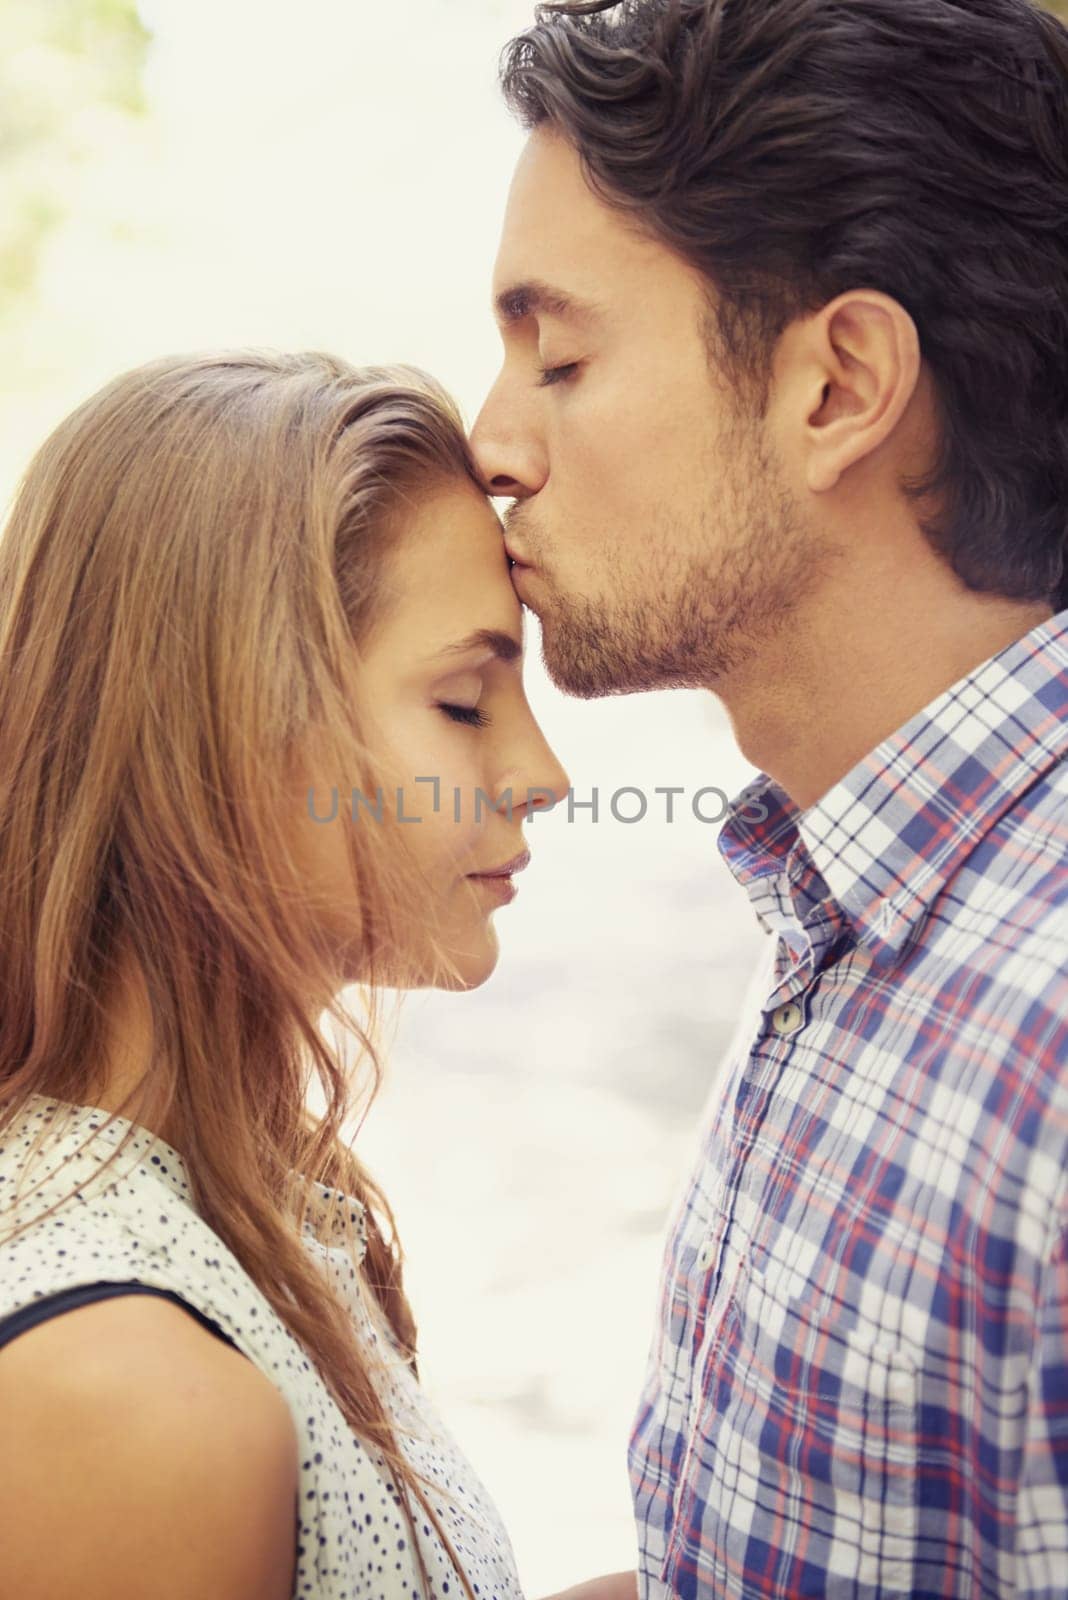 Kiss, affection and couple with love in nature on a date, bonding and loving in a relationship. Content, romance and man kissing a woman on the forehead during valentines day at a park in Italy.